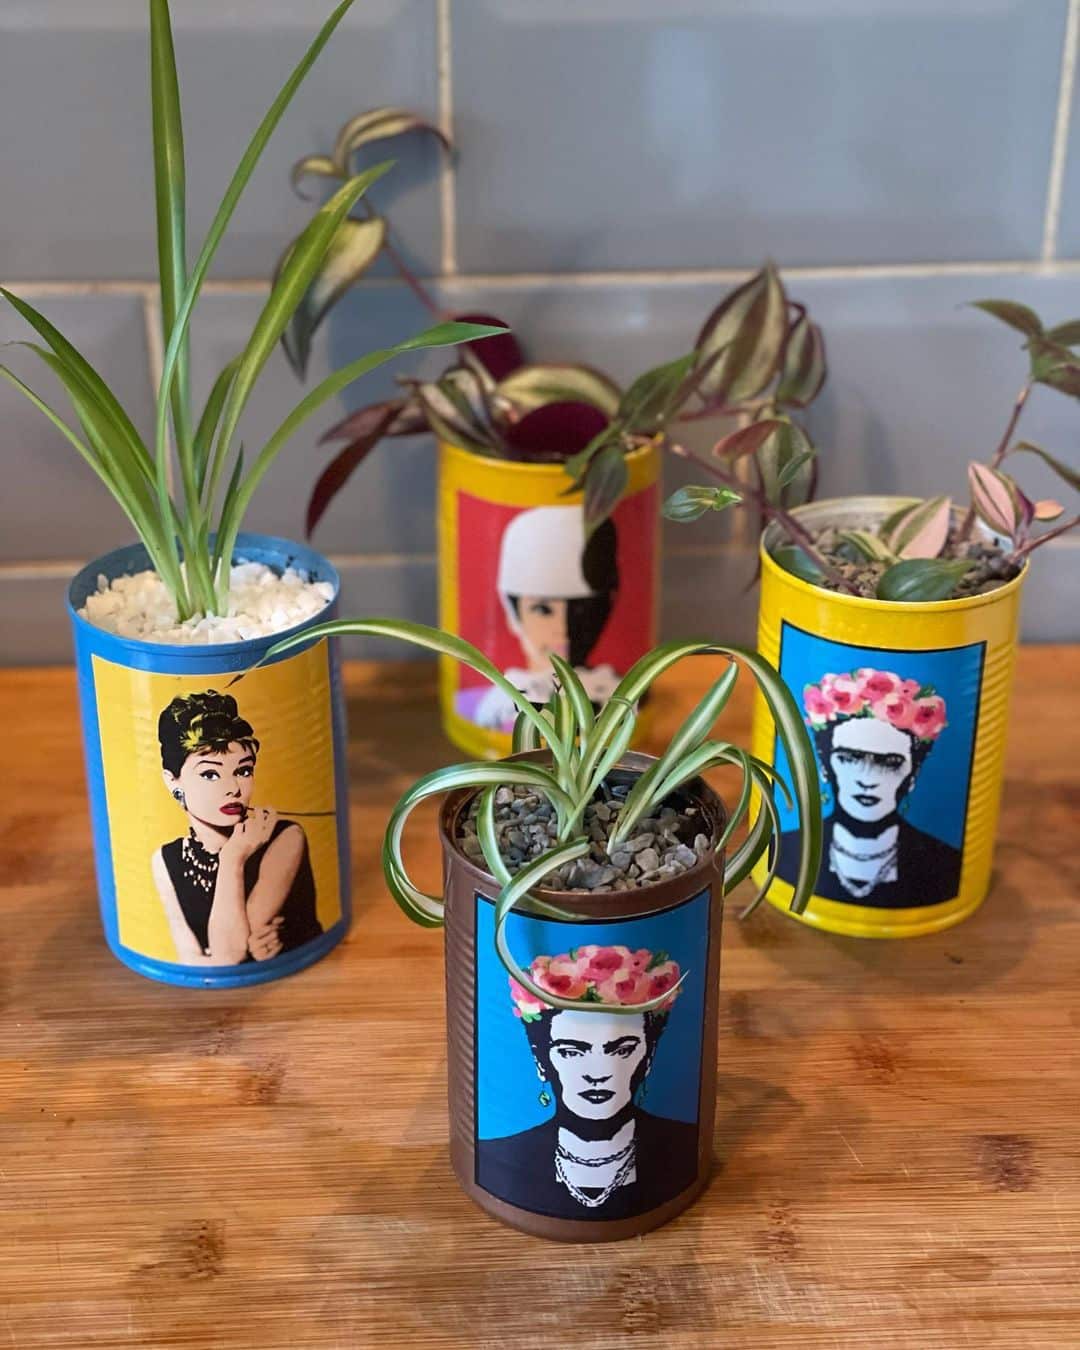 Top 10 Interesting Facts About Recycled Can Planters